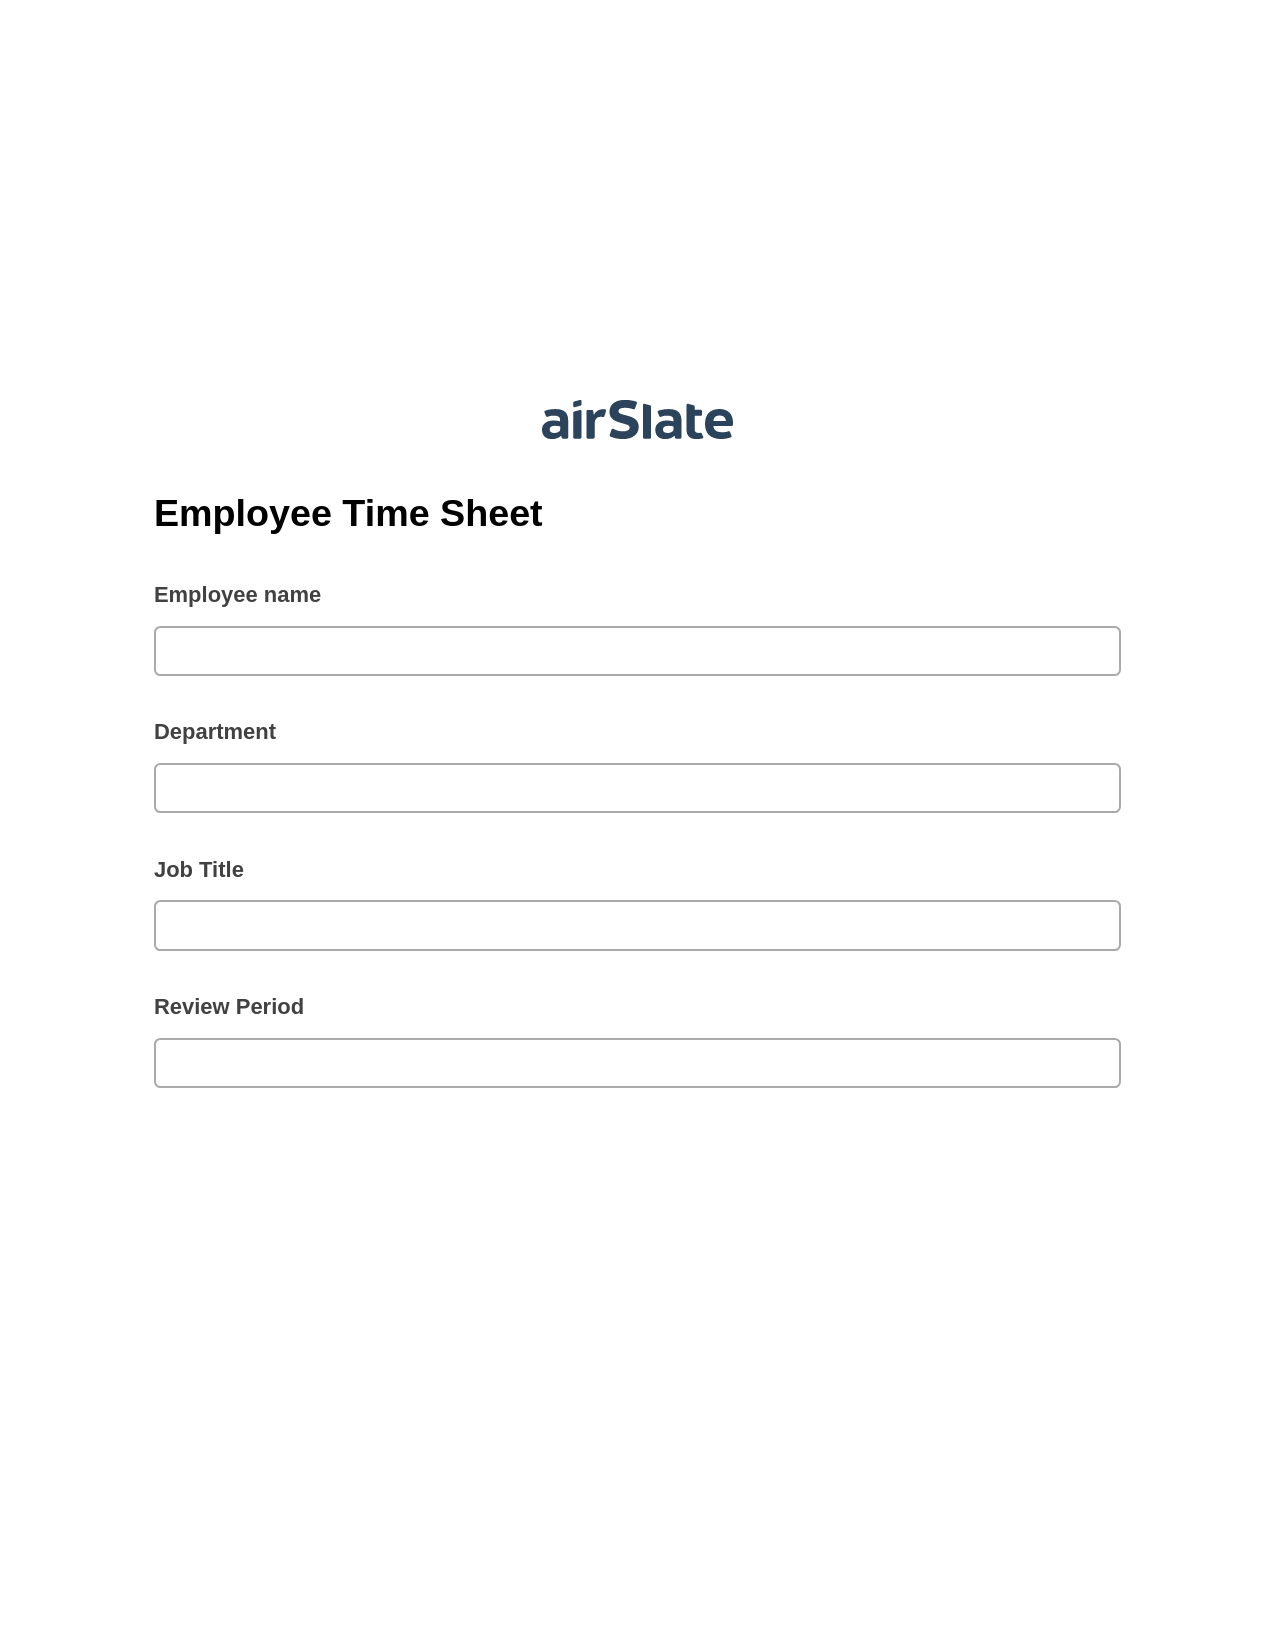 Employee Time Sheet Pre-fill from Salesforce Records with SOQL Bot, Update Audit Trail Bot, Post-finish Document Bot